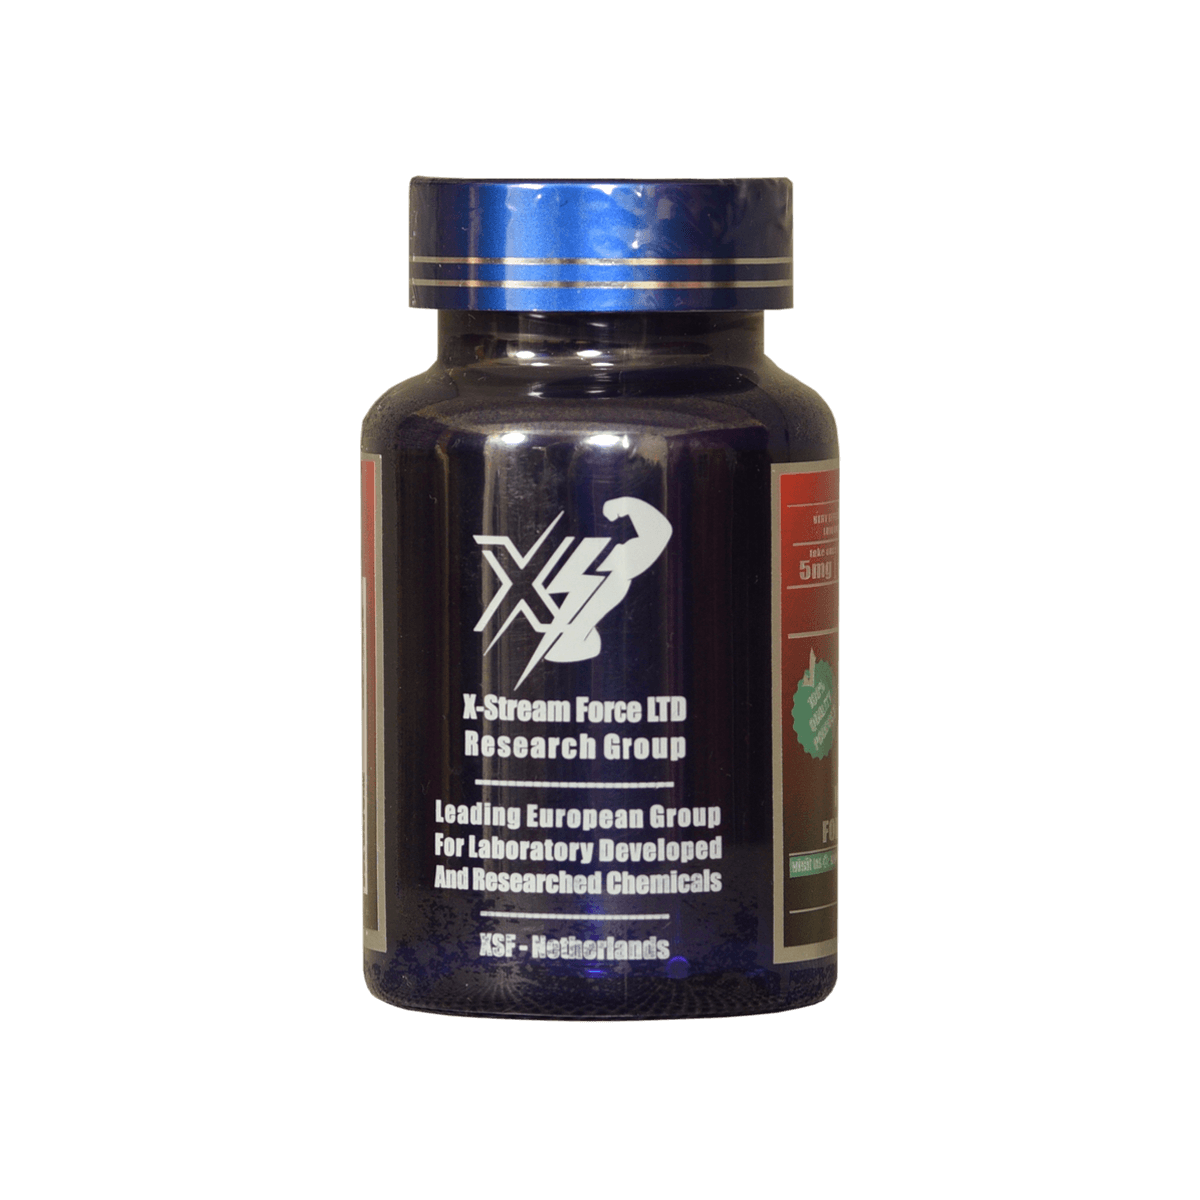 ligandrol-lgd4033-capsules-90-5mg-muscle shop-xstreamforce-for muscle mass-strength-volume-dramatic gains, buy online✦lgd4033 sarms✦ fitness supplements | XSF Store